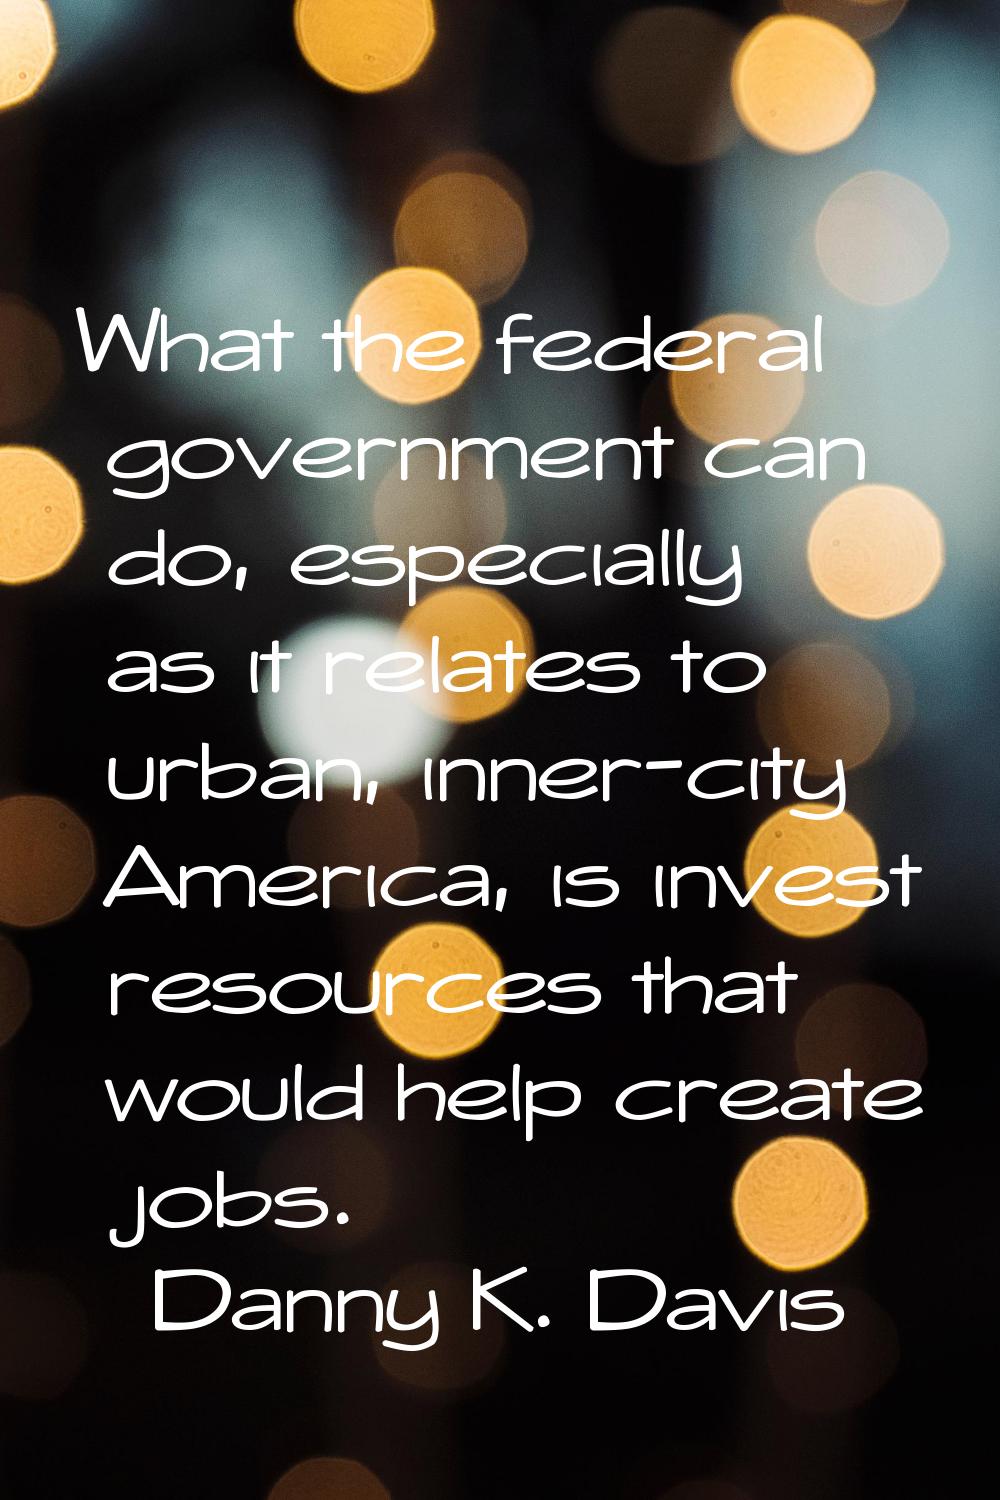 What the federal government can do, especially as it relates to urban, inner-city America, is inves